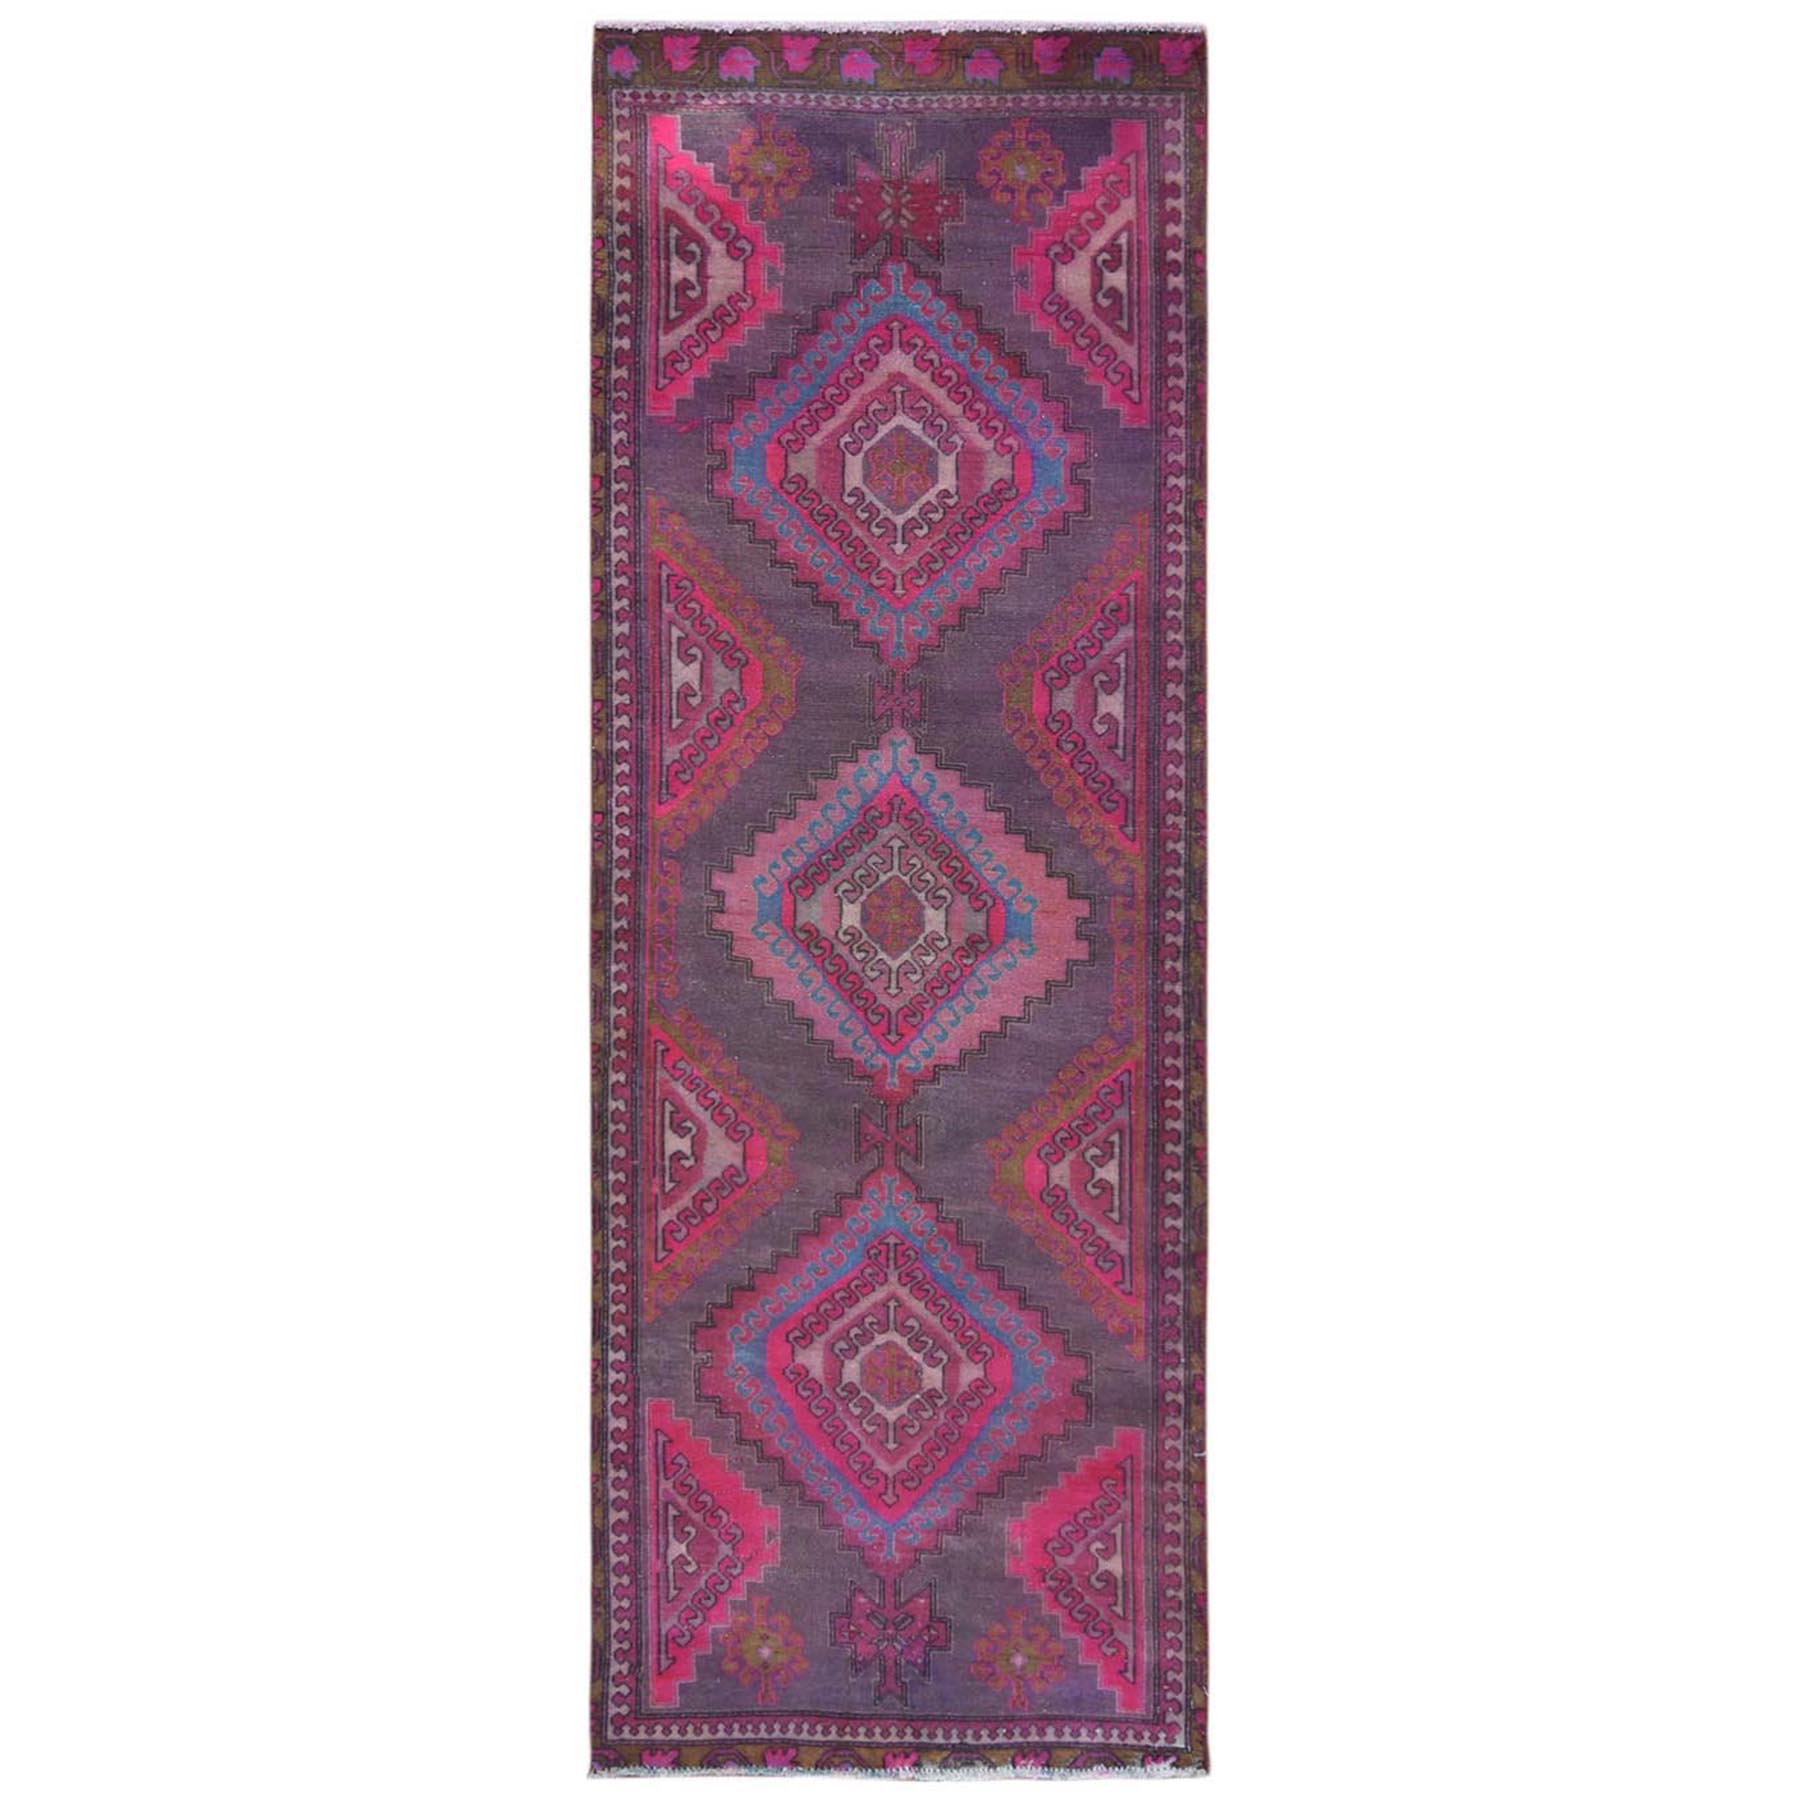 3'2"x9' Gray with Pink Hand Woven Persian Shiraz Organic Wool Clean Old Cropped Thin Pile Oriental Runner Rug 